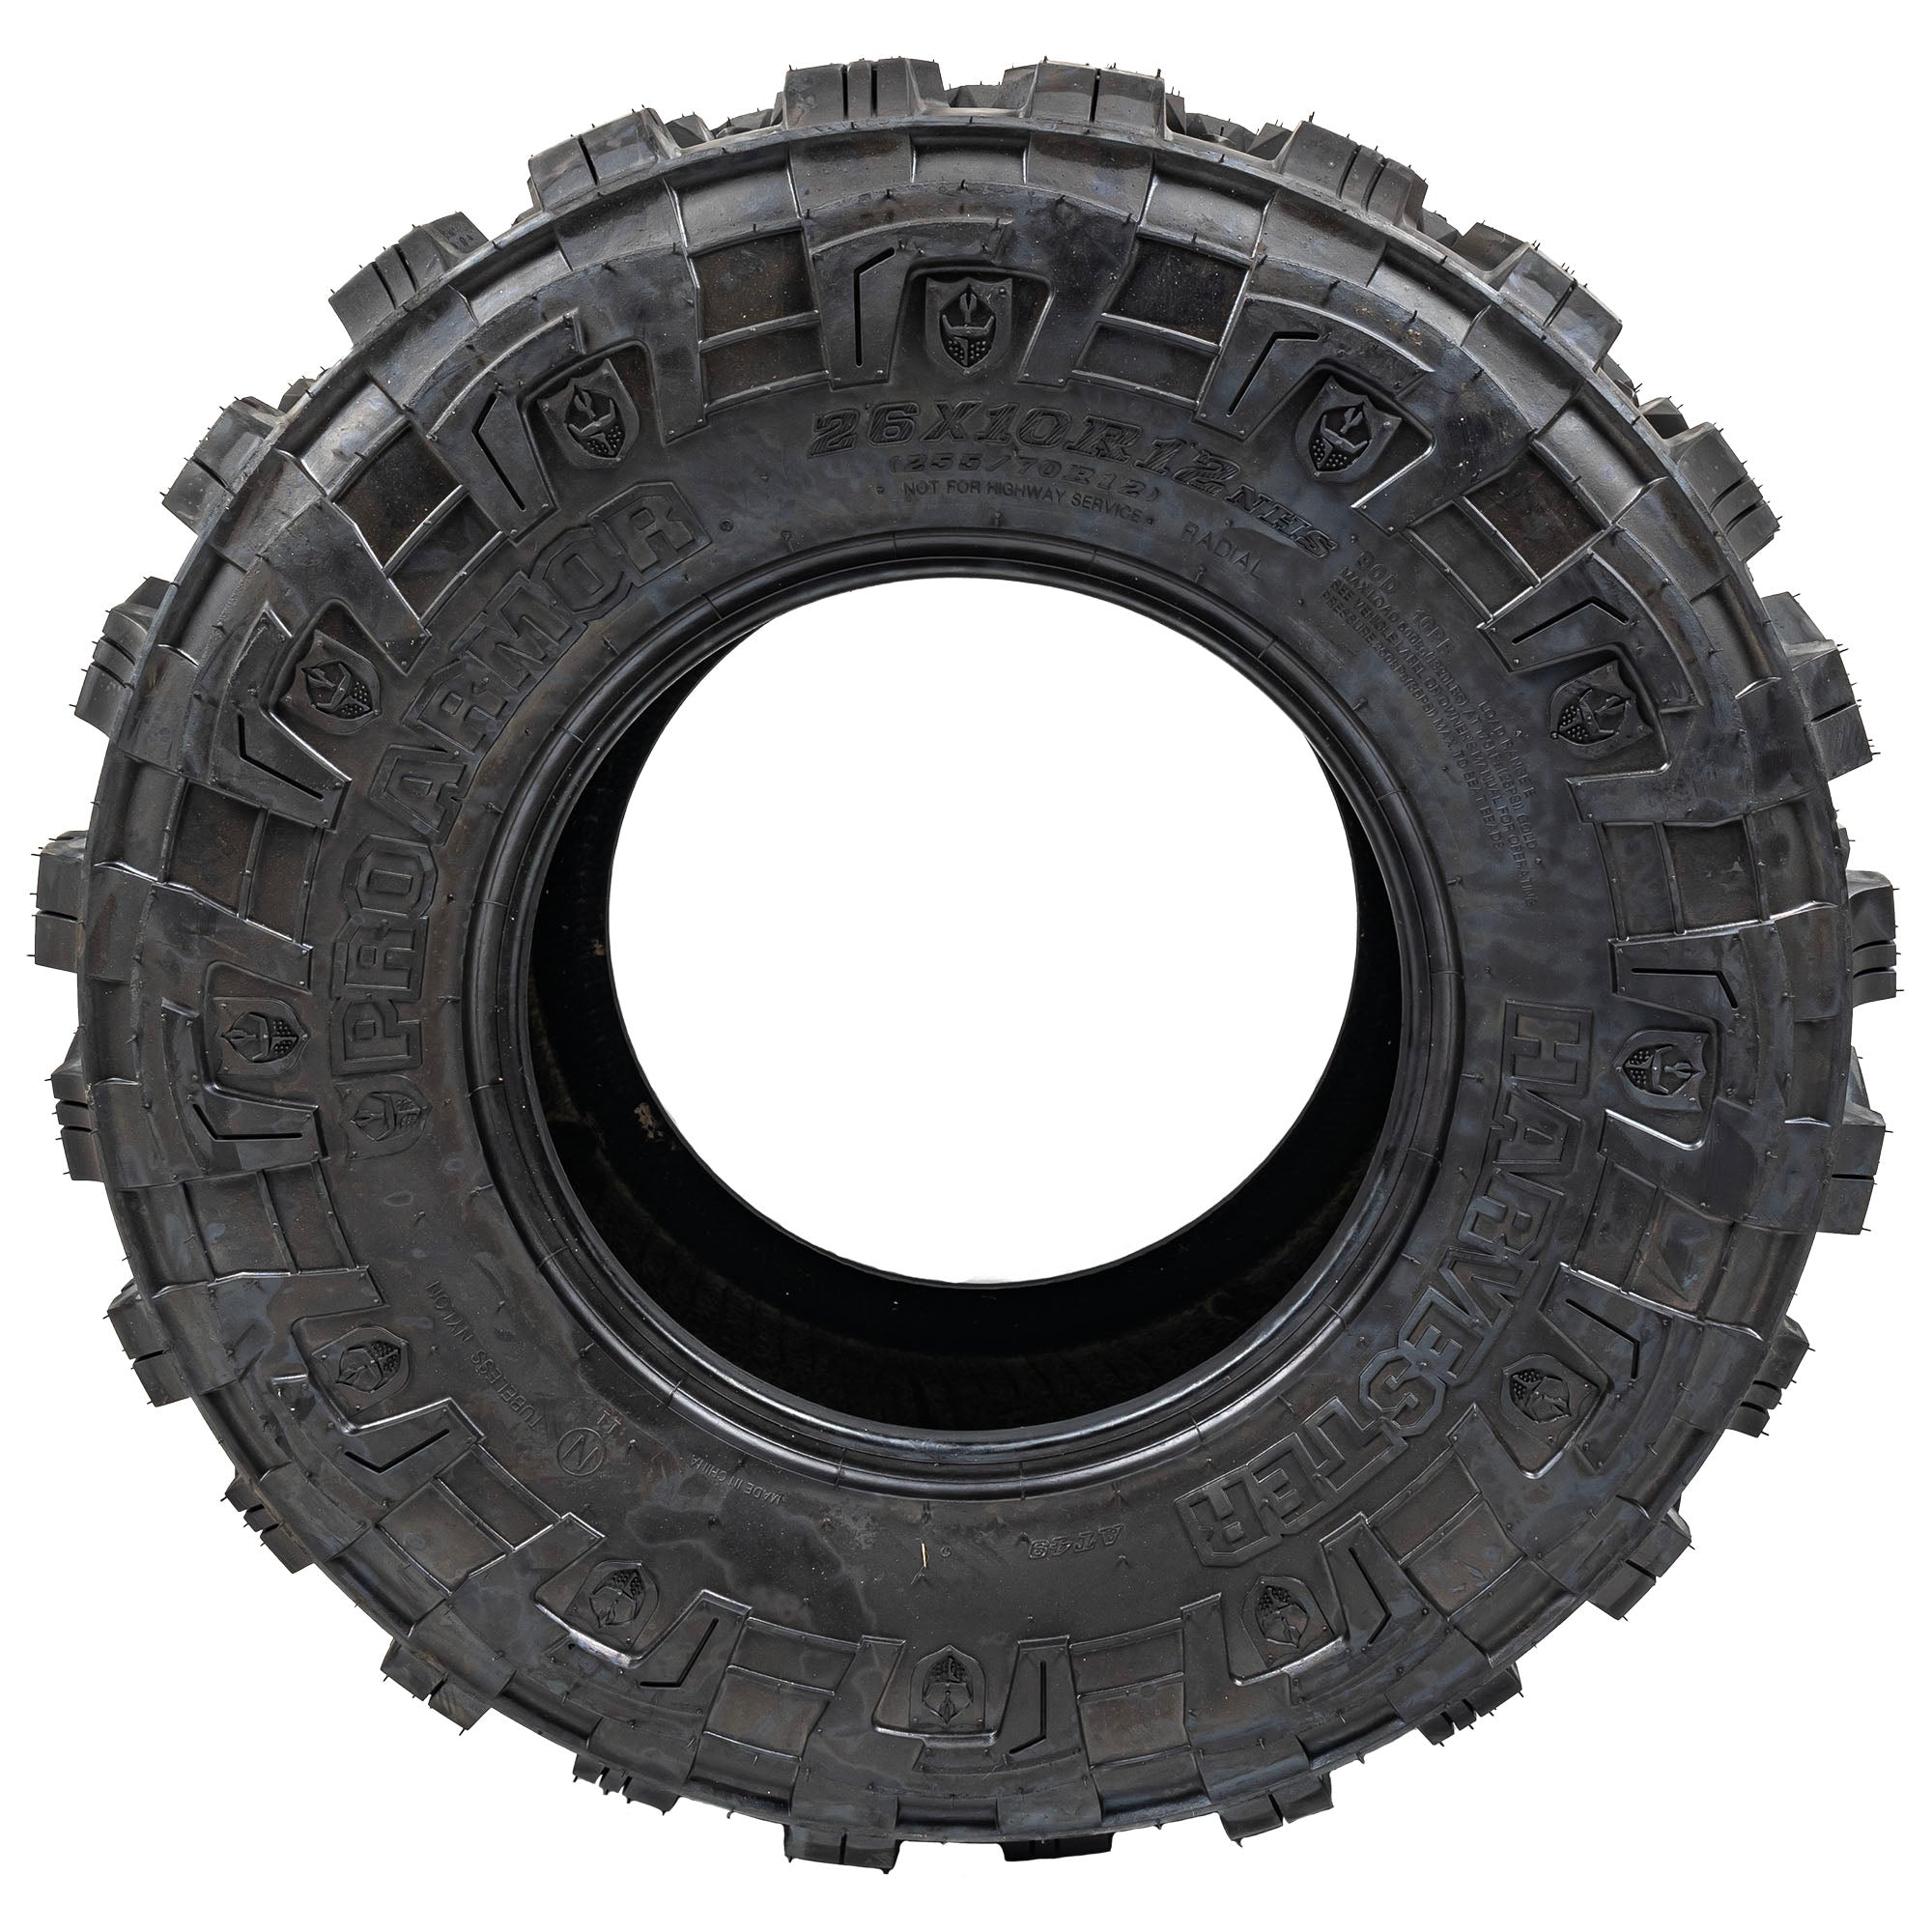 Pro Armor 5415966 Front / Rear Tire